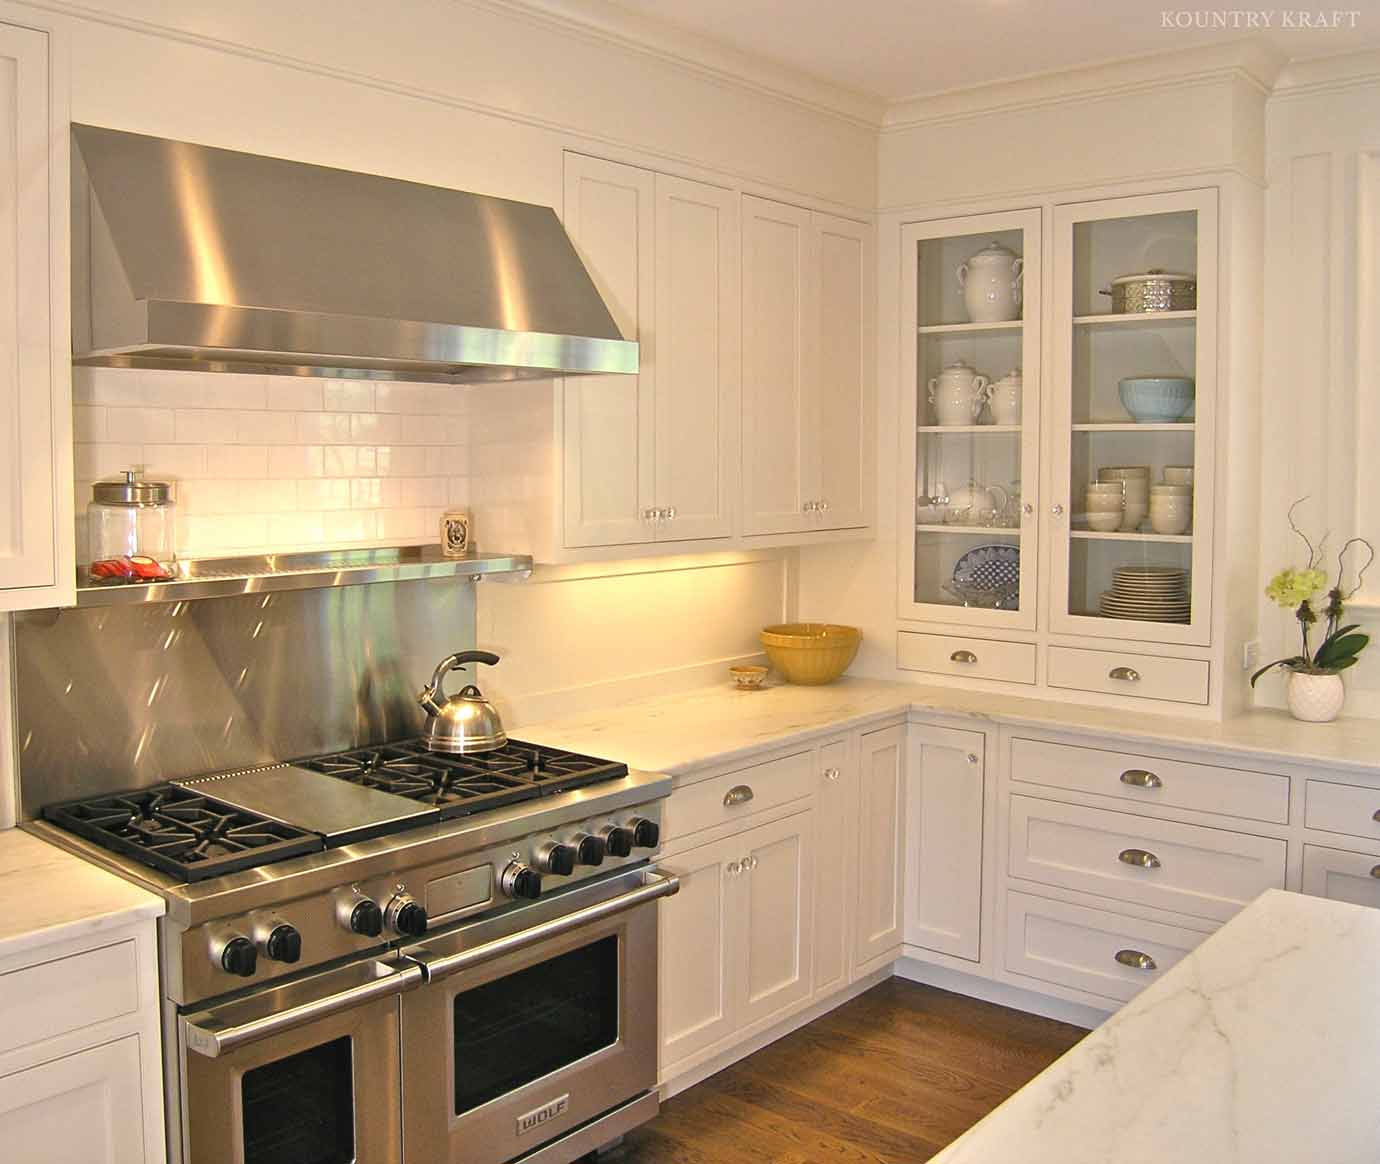 White U-shaped kitchen with stainless steel range and glass panel cabinetry Darien, CT